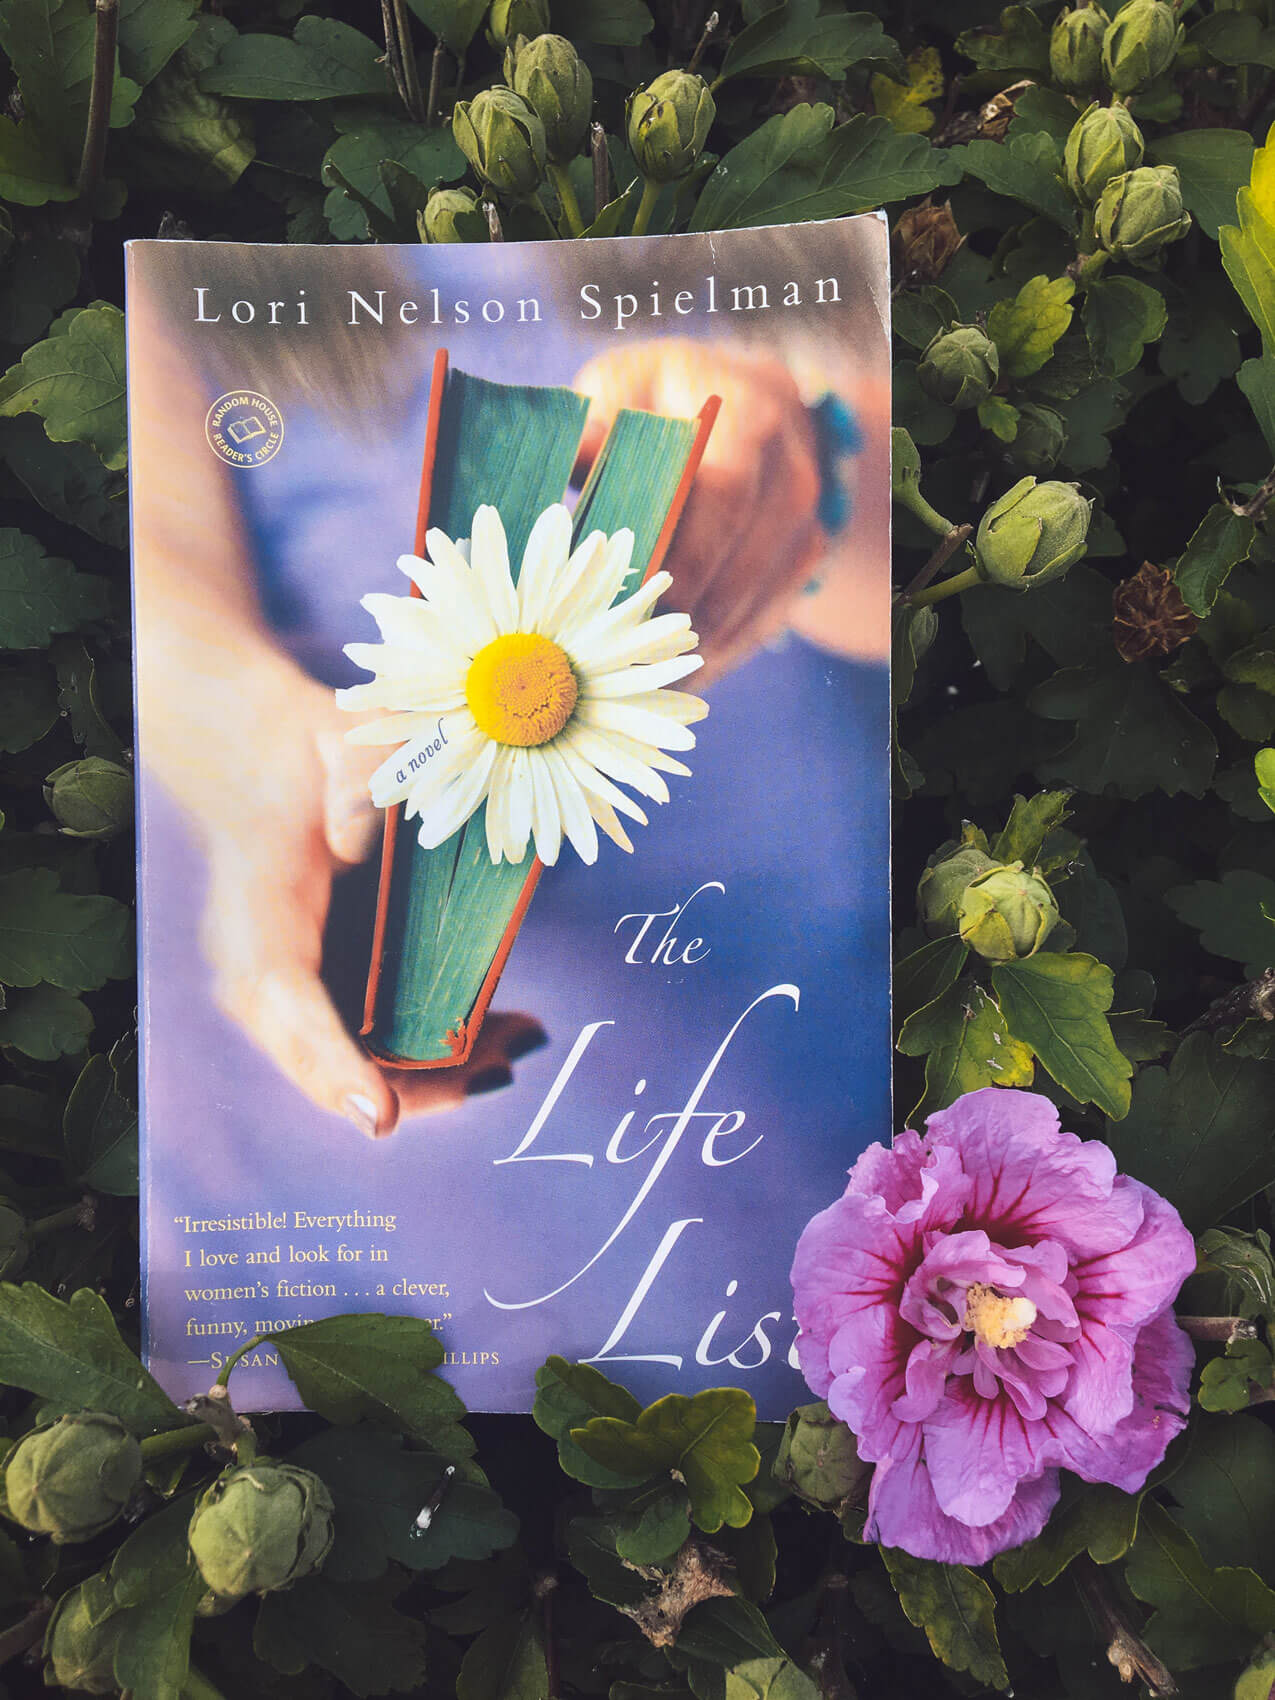 Searching for an inspirational fiction book about following your heart? You won't want to miss The Life List by Lori Nelson Spielman. Learn why I loved the book inside my review here. #growthmindset #inspiringbooks #inspiringreads #booklover #bookrecommendations #followyourheart #trueself #consciousliving #spiritualawakening #fictionreads